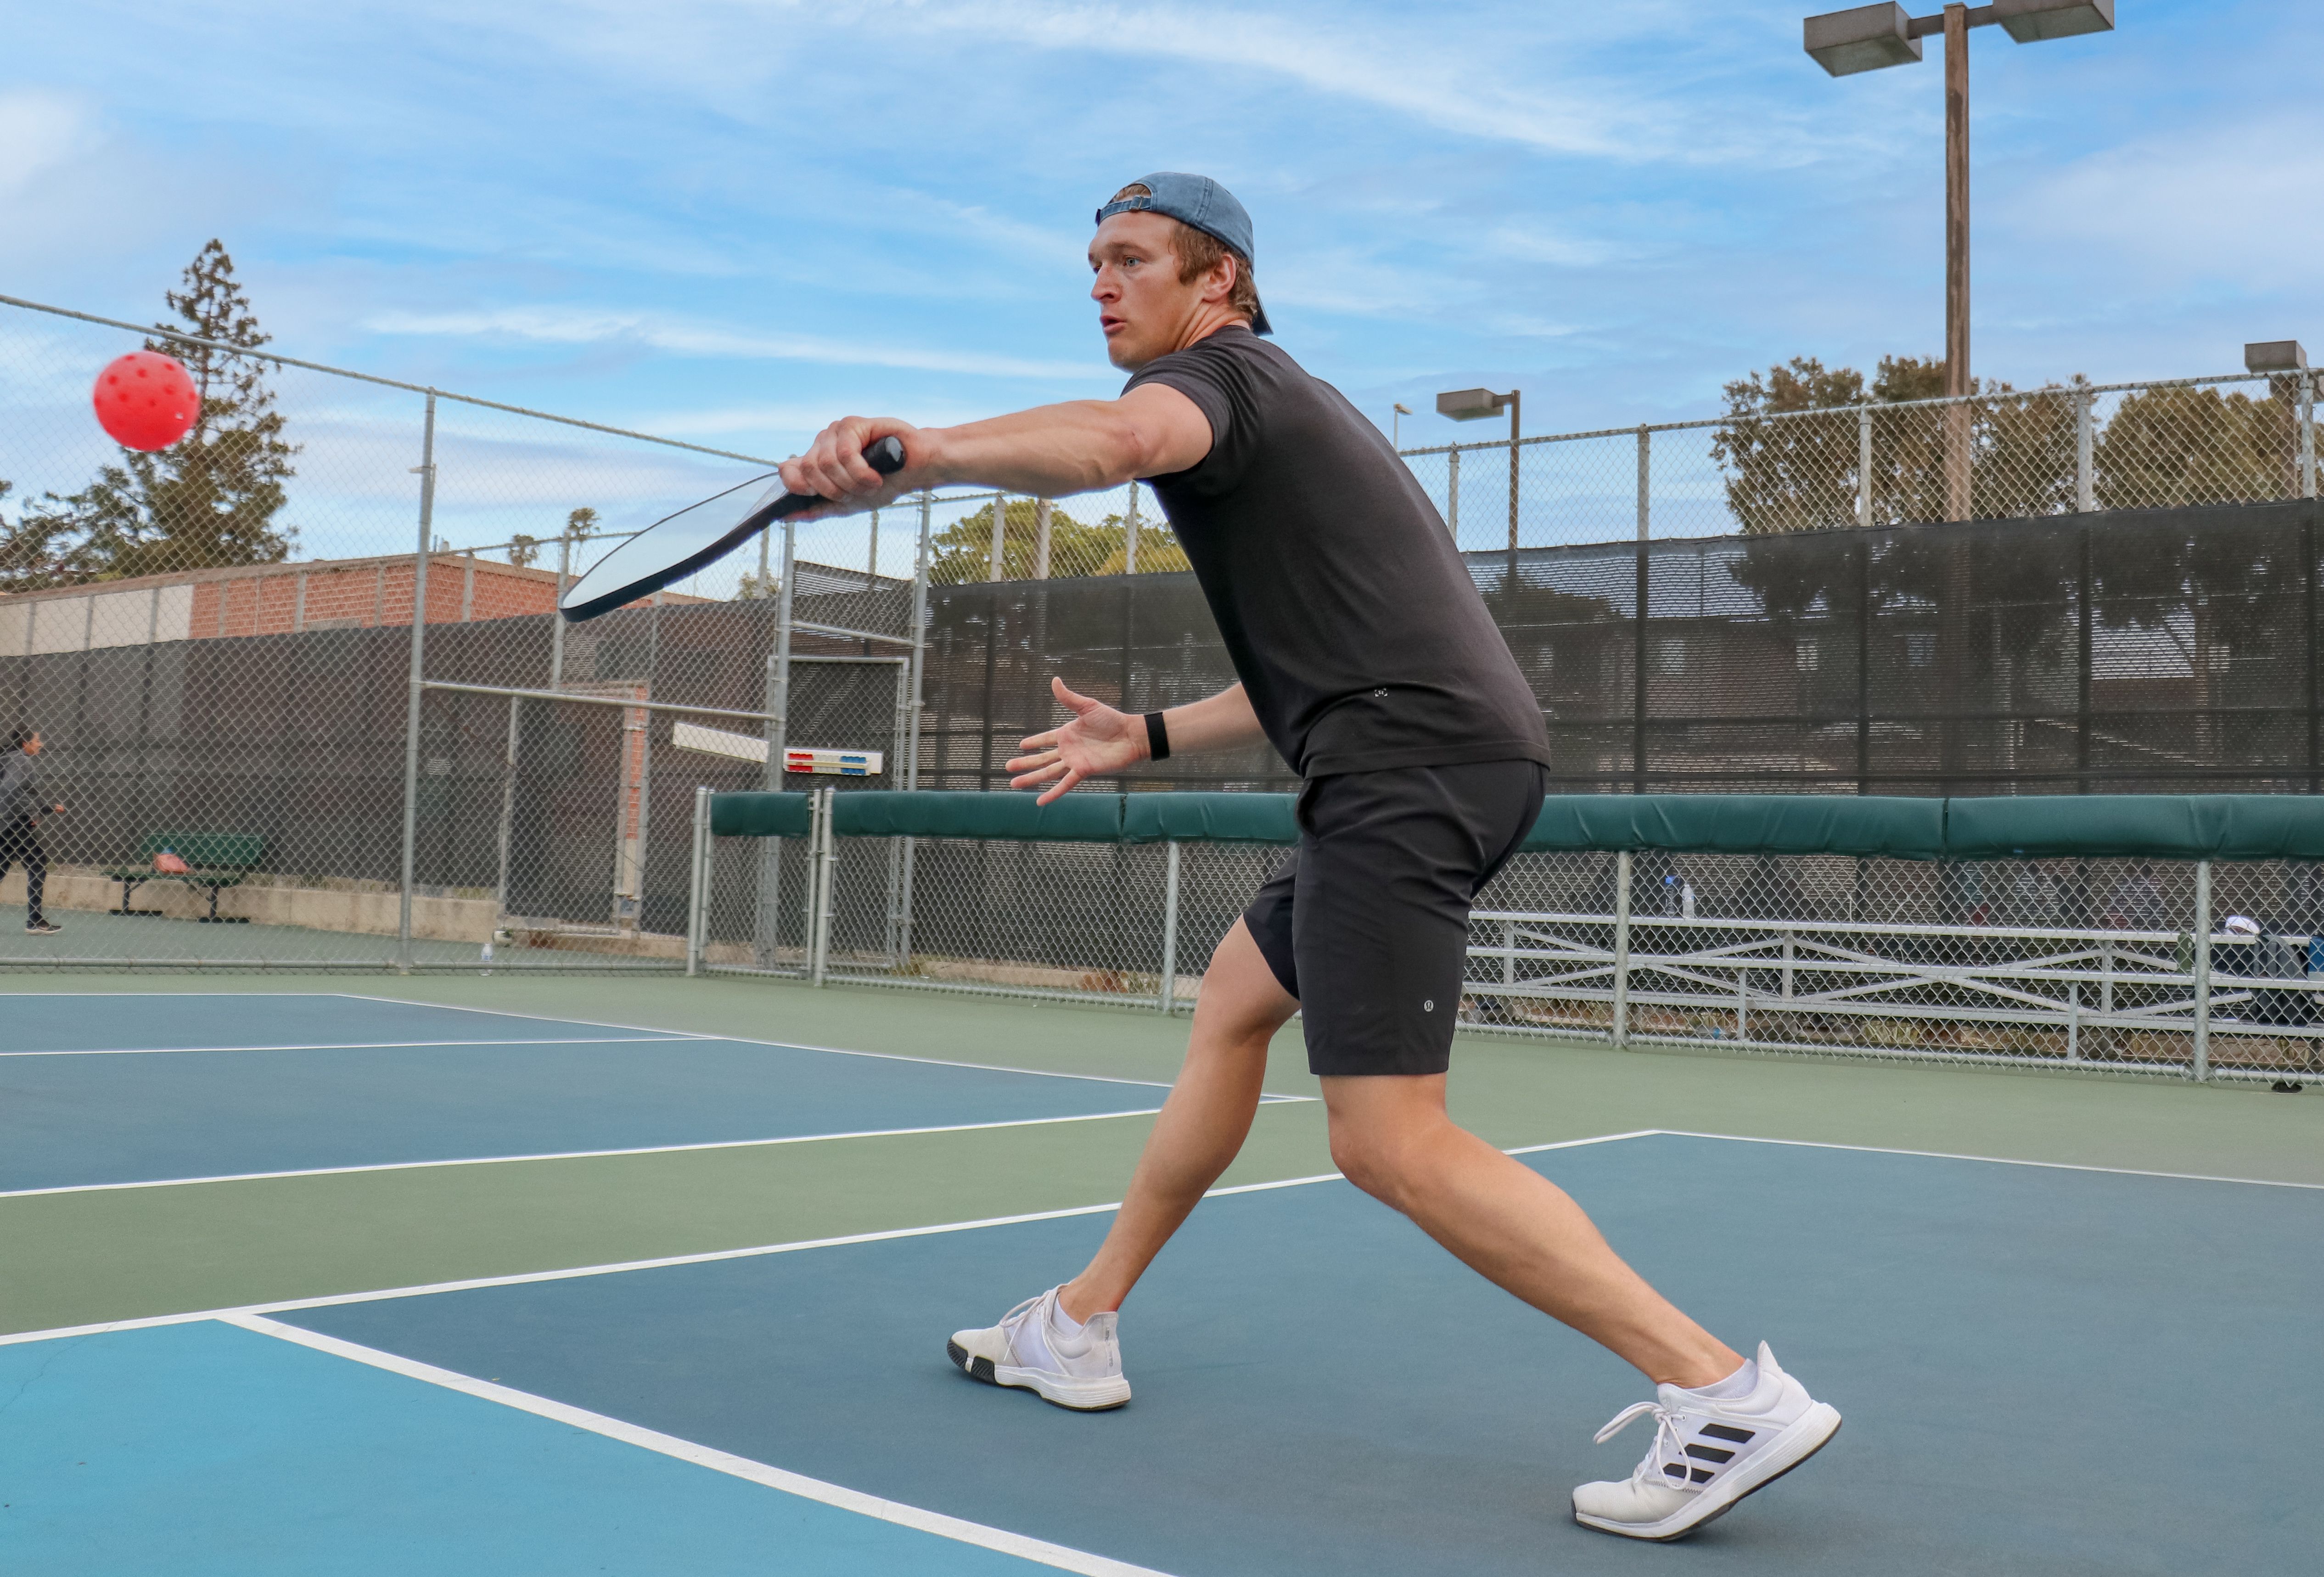 Player reaches across the pickleball court to hit a ball